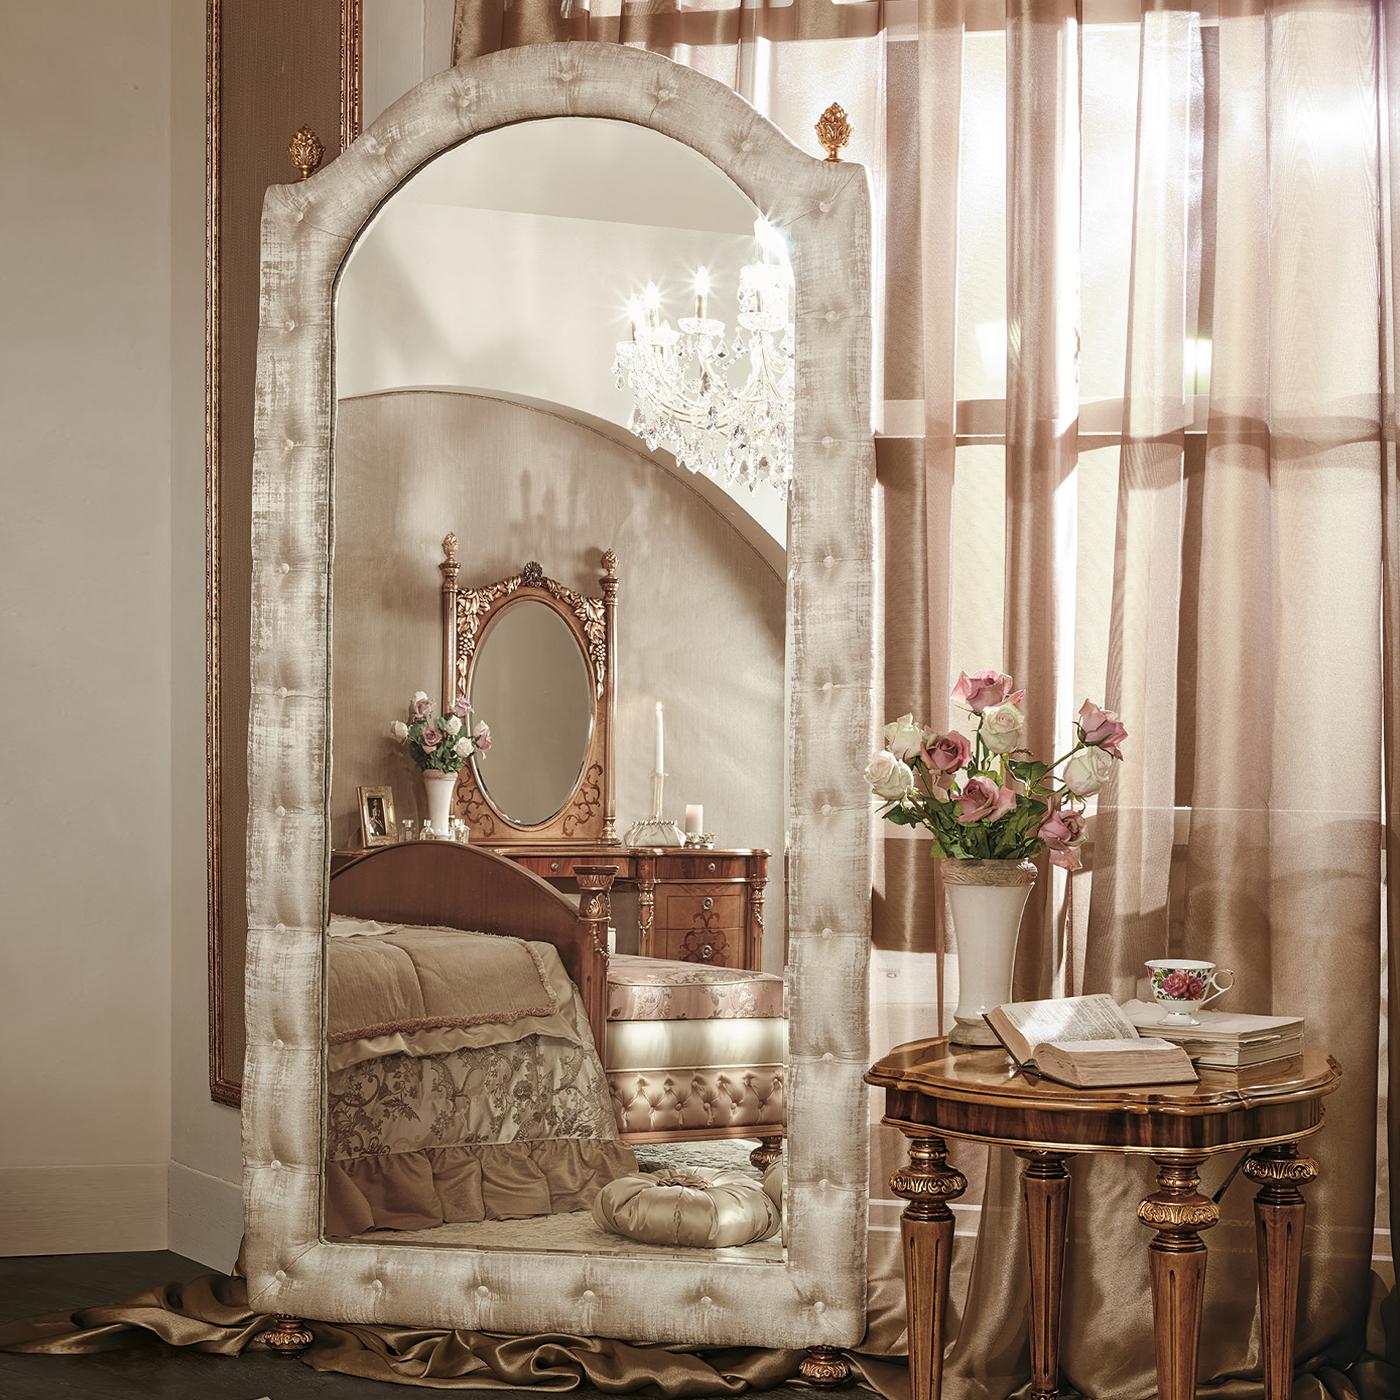 A rich and exclusive design characterizes this precious floor mirror, fancy addition to classic or eclectic decors. Crafted of wood, the rectangular frame has a curved top element and is upholstered in subtly shiny, beige-hued fabric enlivened by a